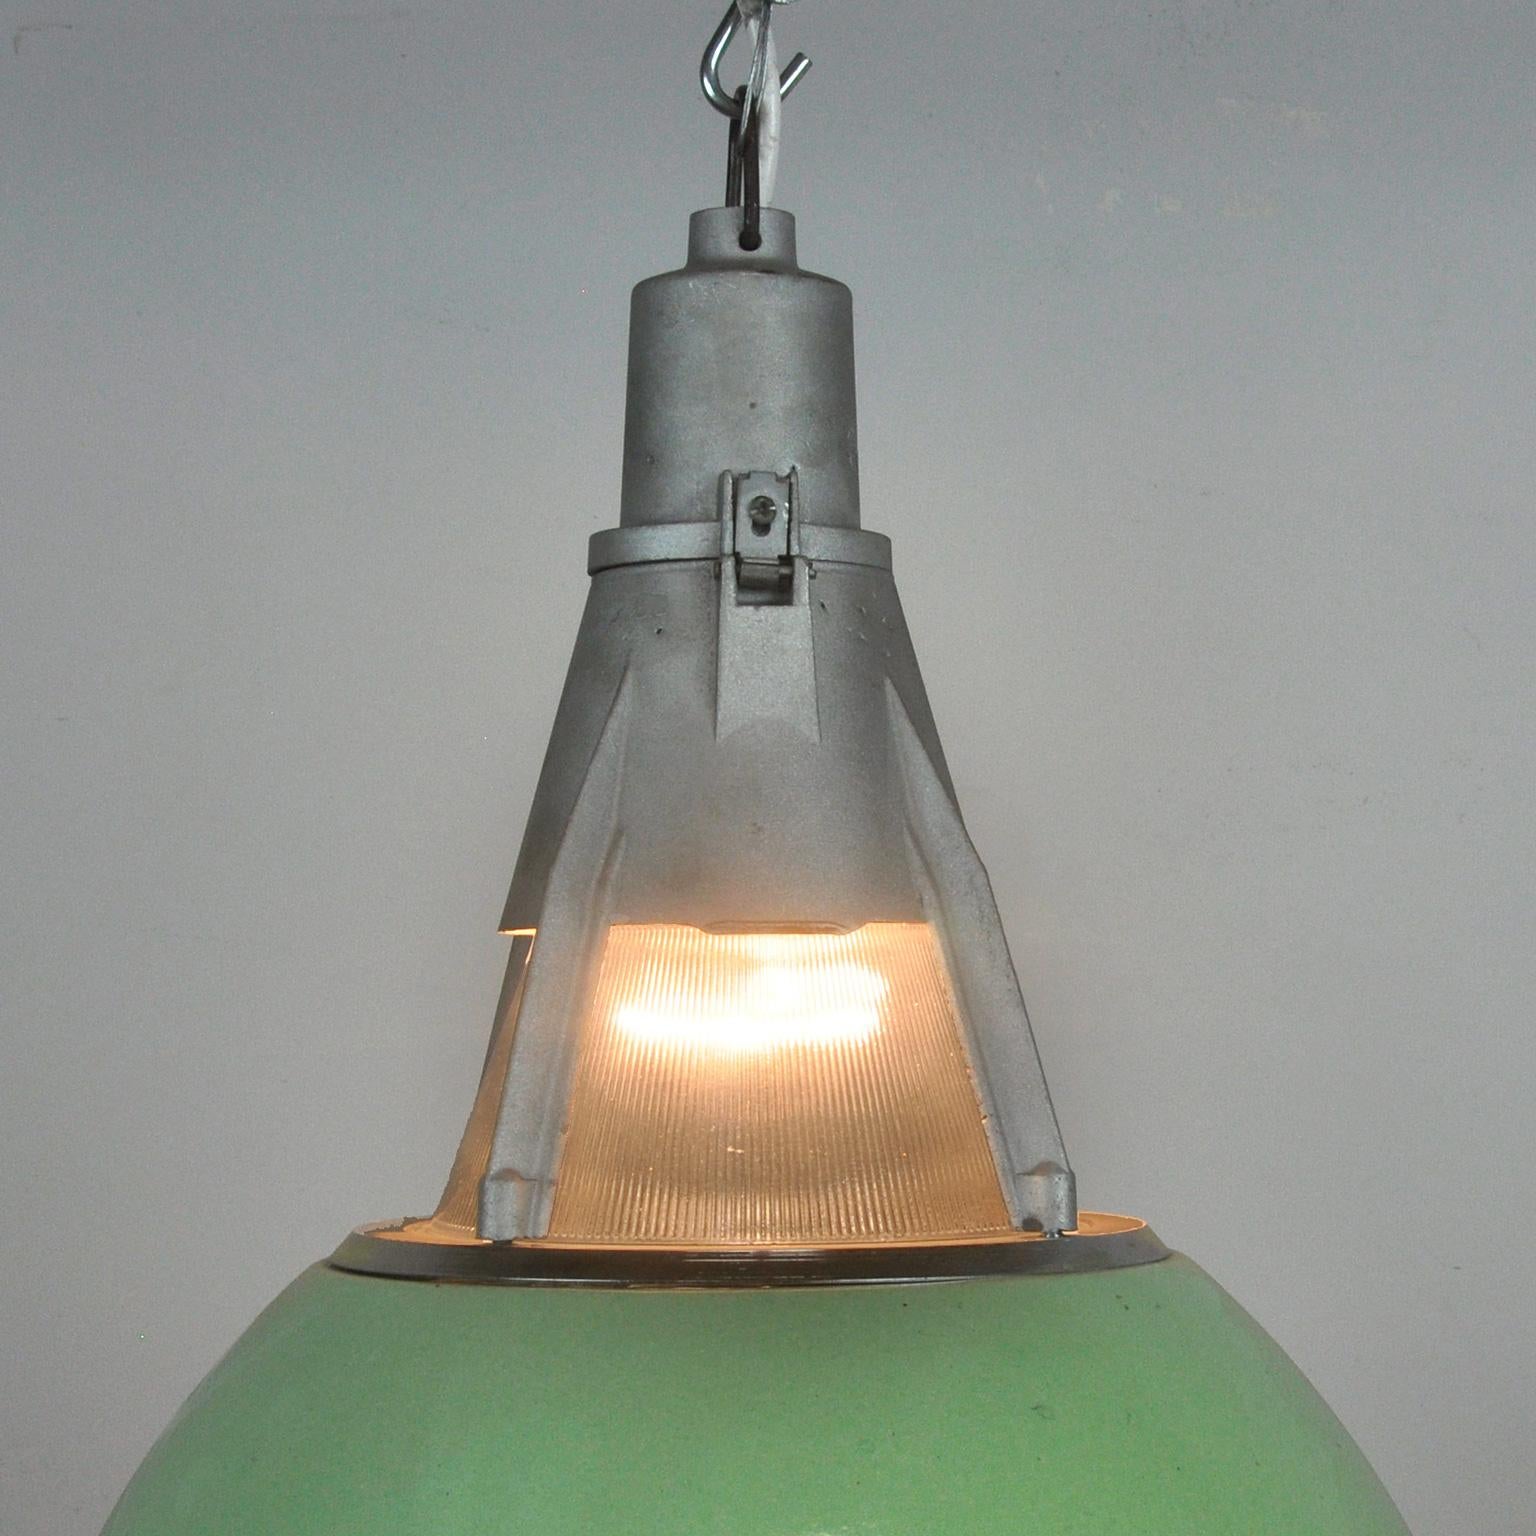 Mid-20th Century Green Enameled Industrial Pendant Light, 1950s For Sale